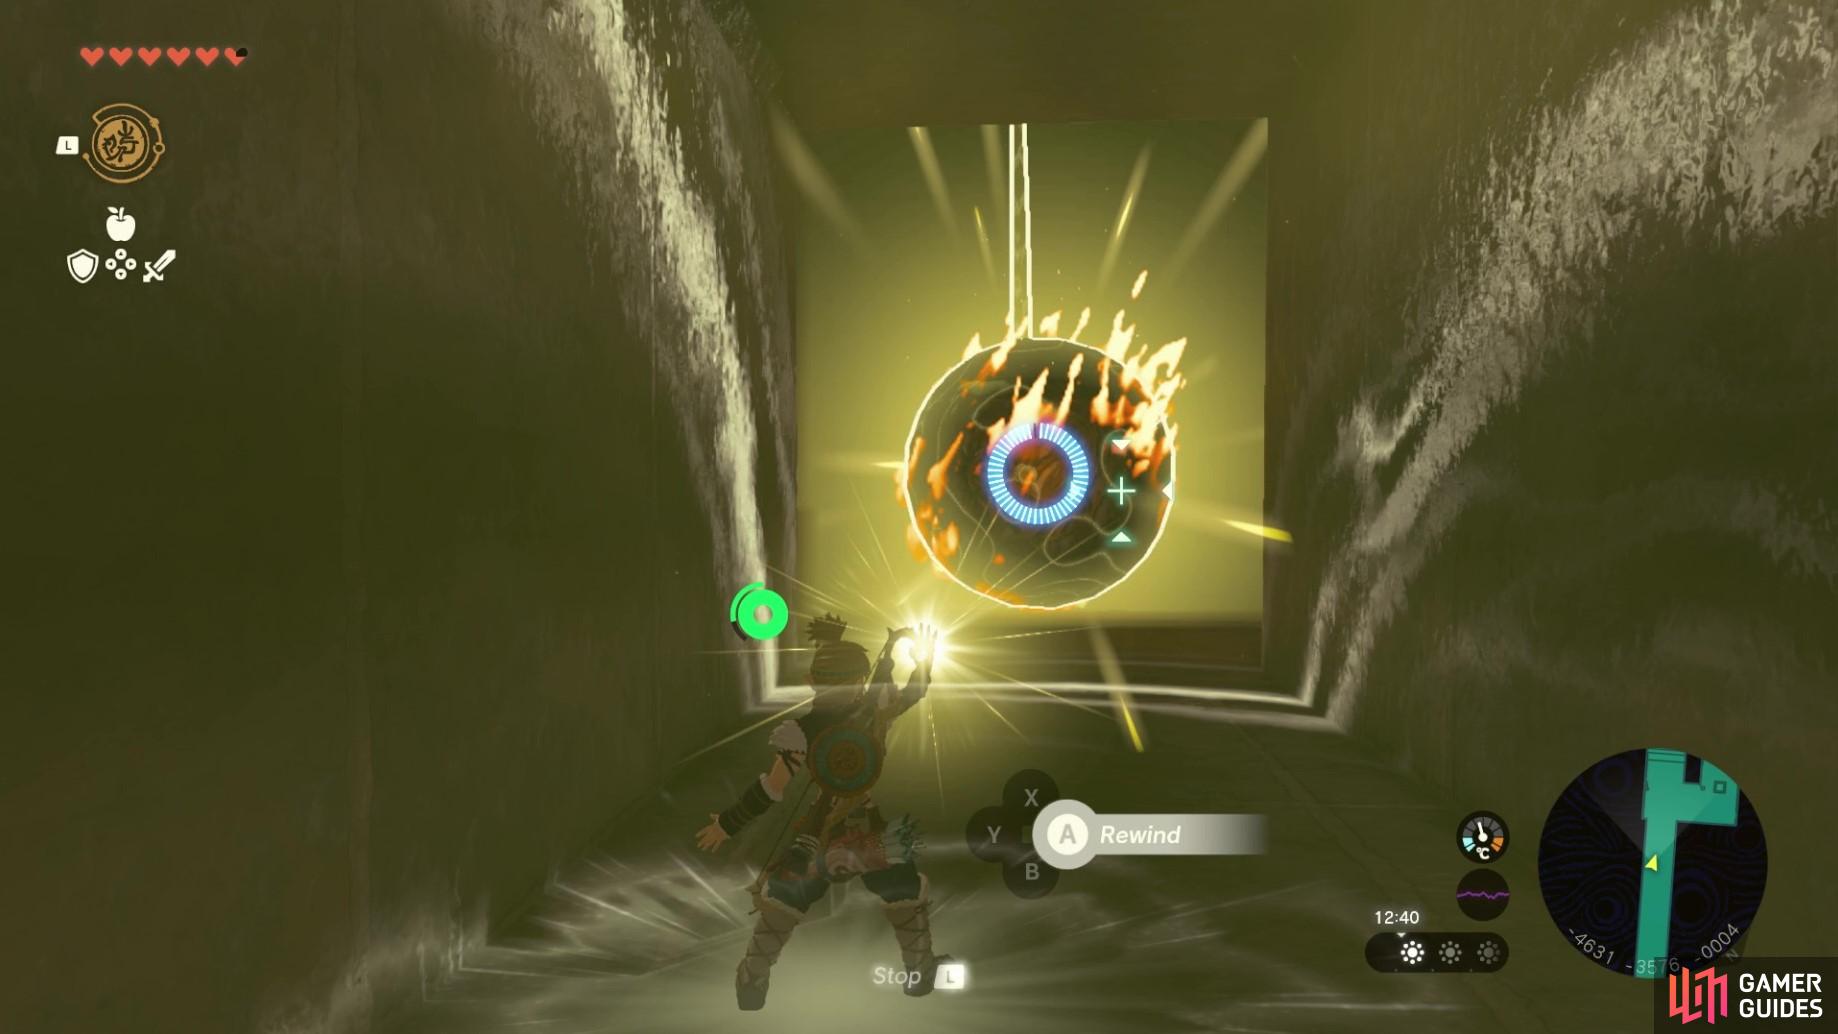 Use recall to stop the fiery ball from hitting you!